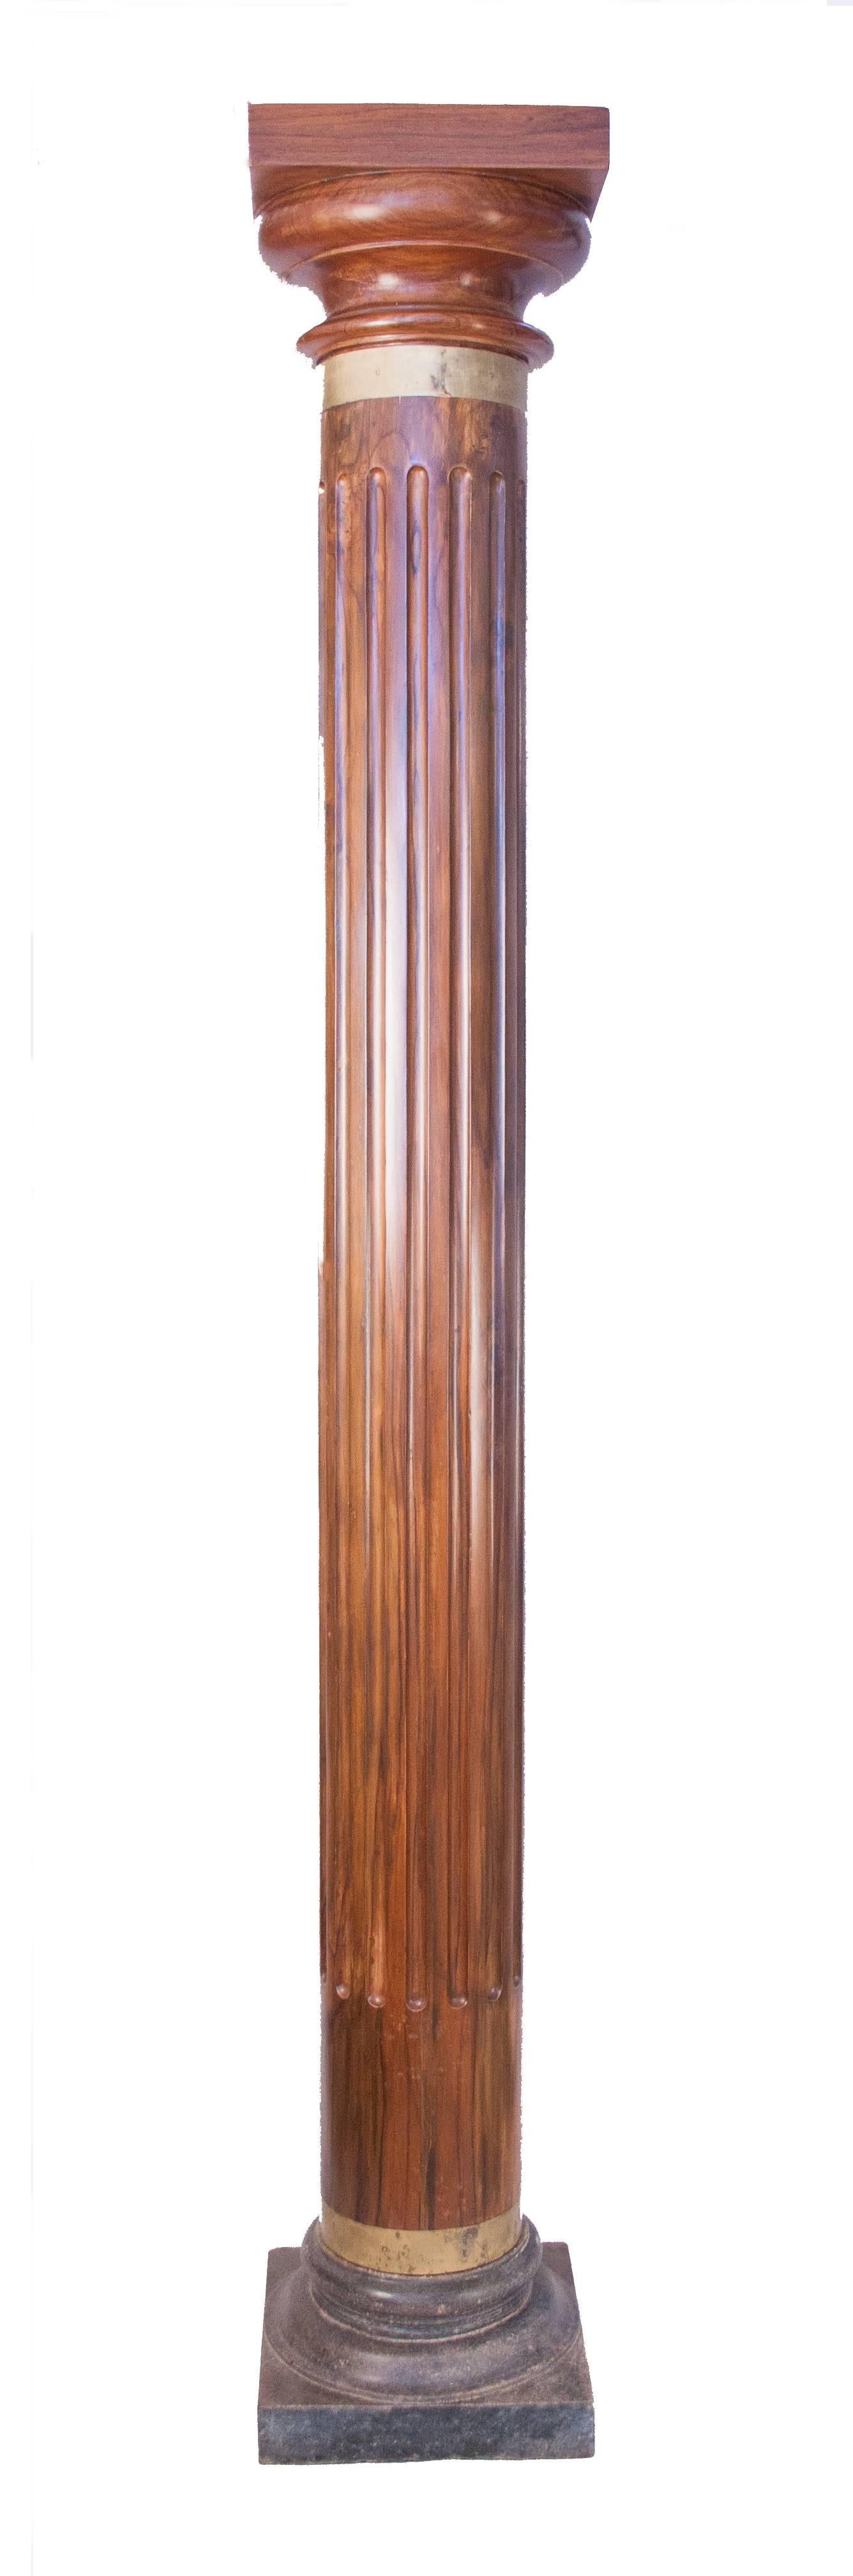 A handsome pair of reeded columns from British India in richly finished teak, circa 1920. The round wooden shafts of these pillars are hand-gadrooned and finished with original brass collars. The columns rest on square, solid granite bases and are